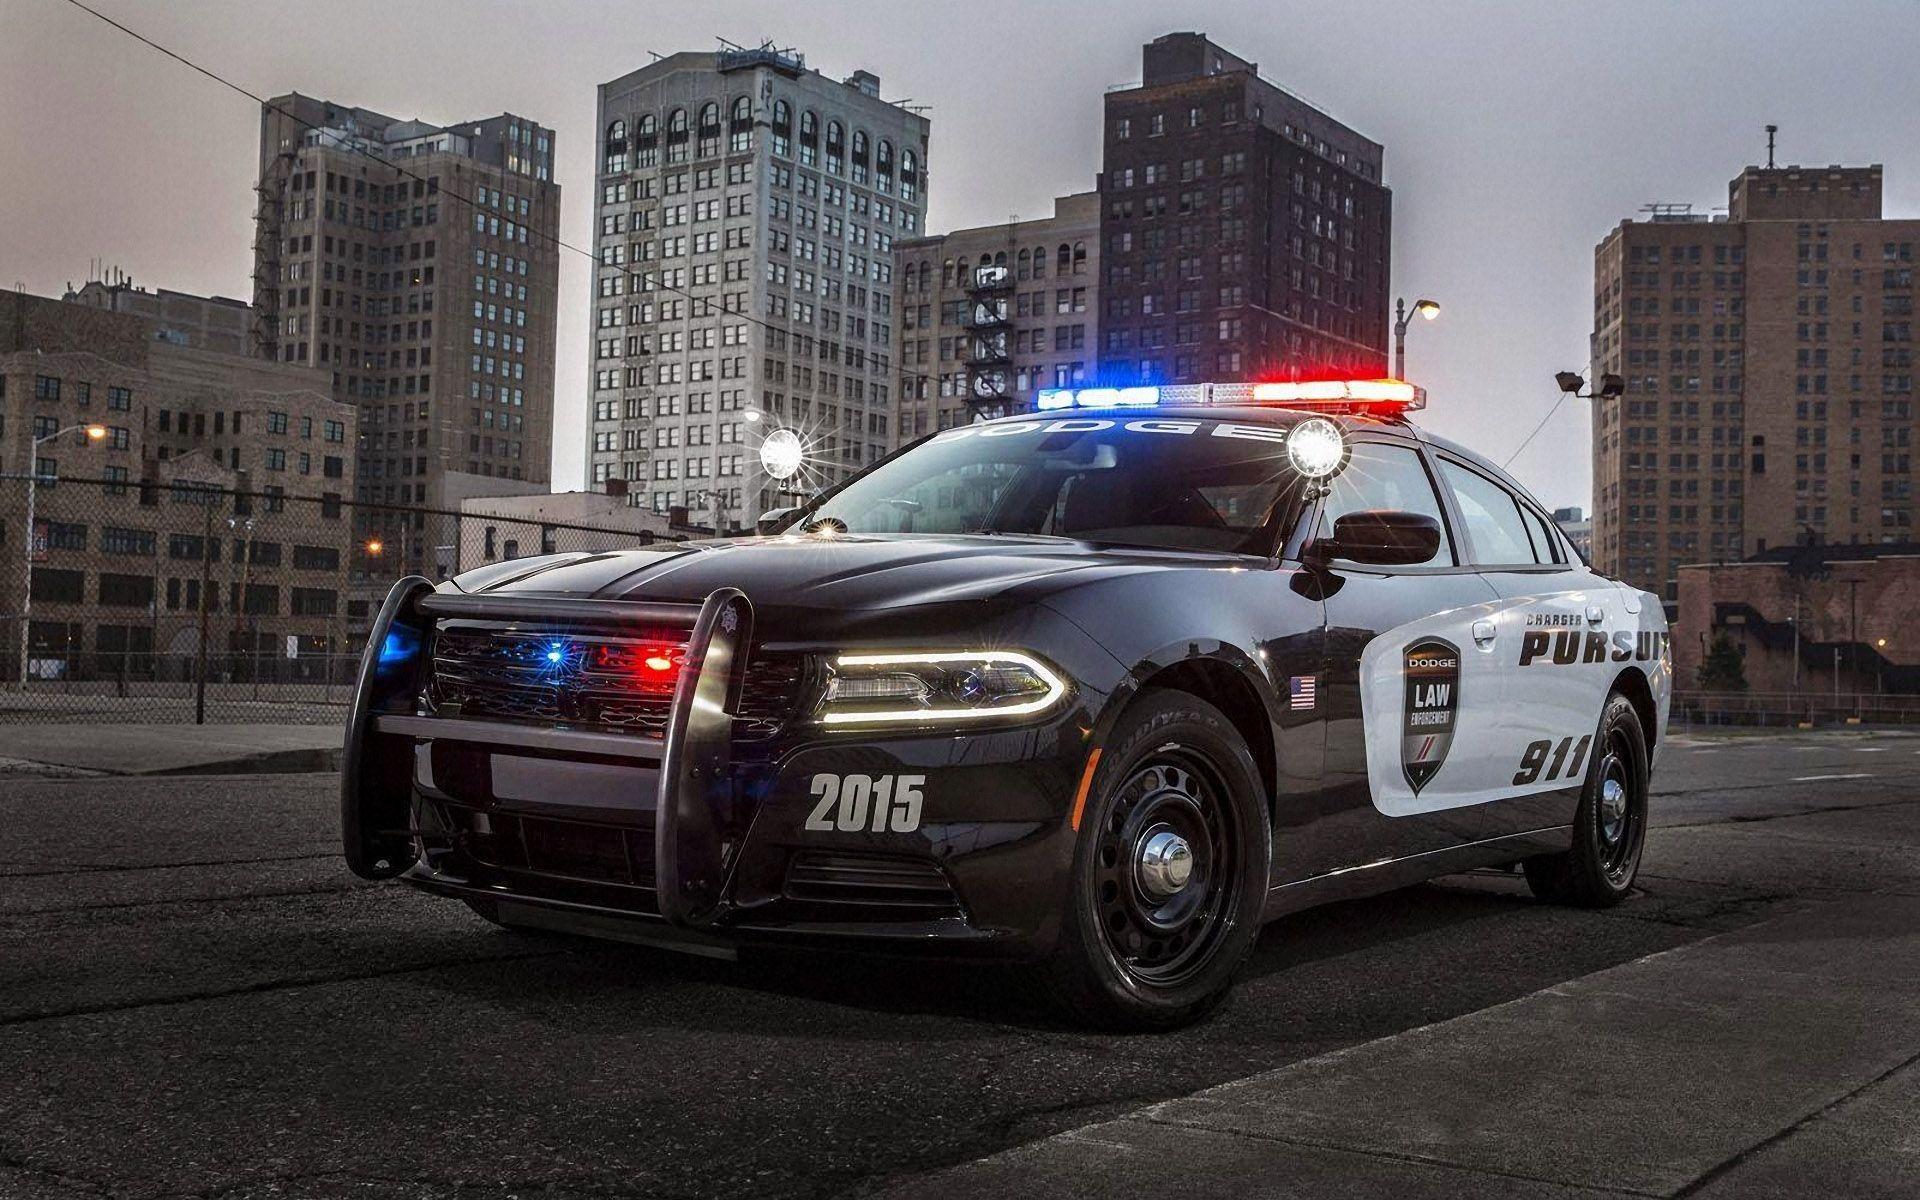 Police Car Wallpaper background picture